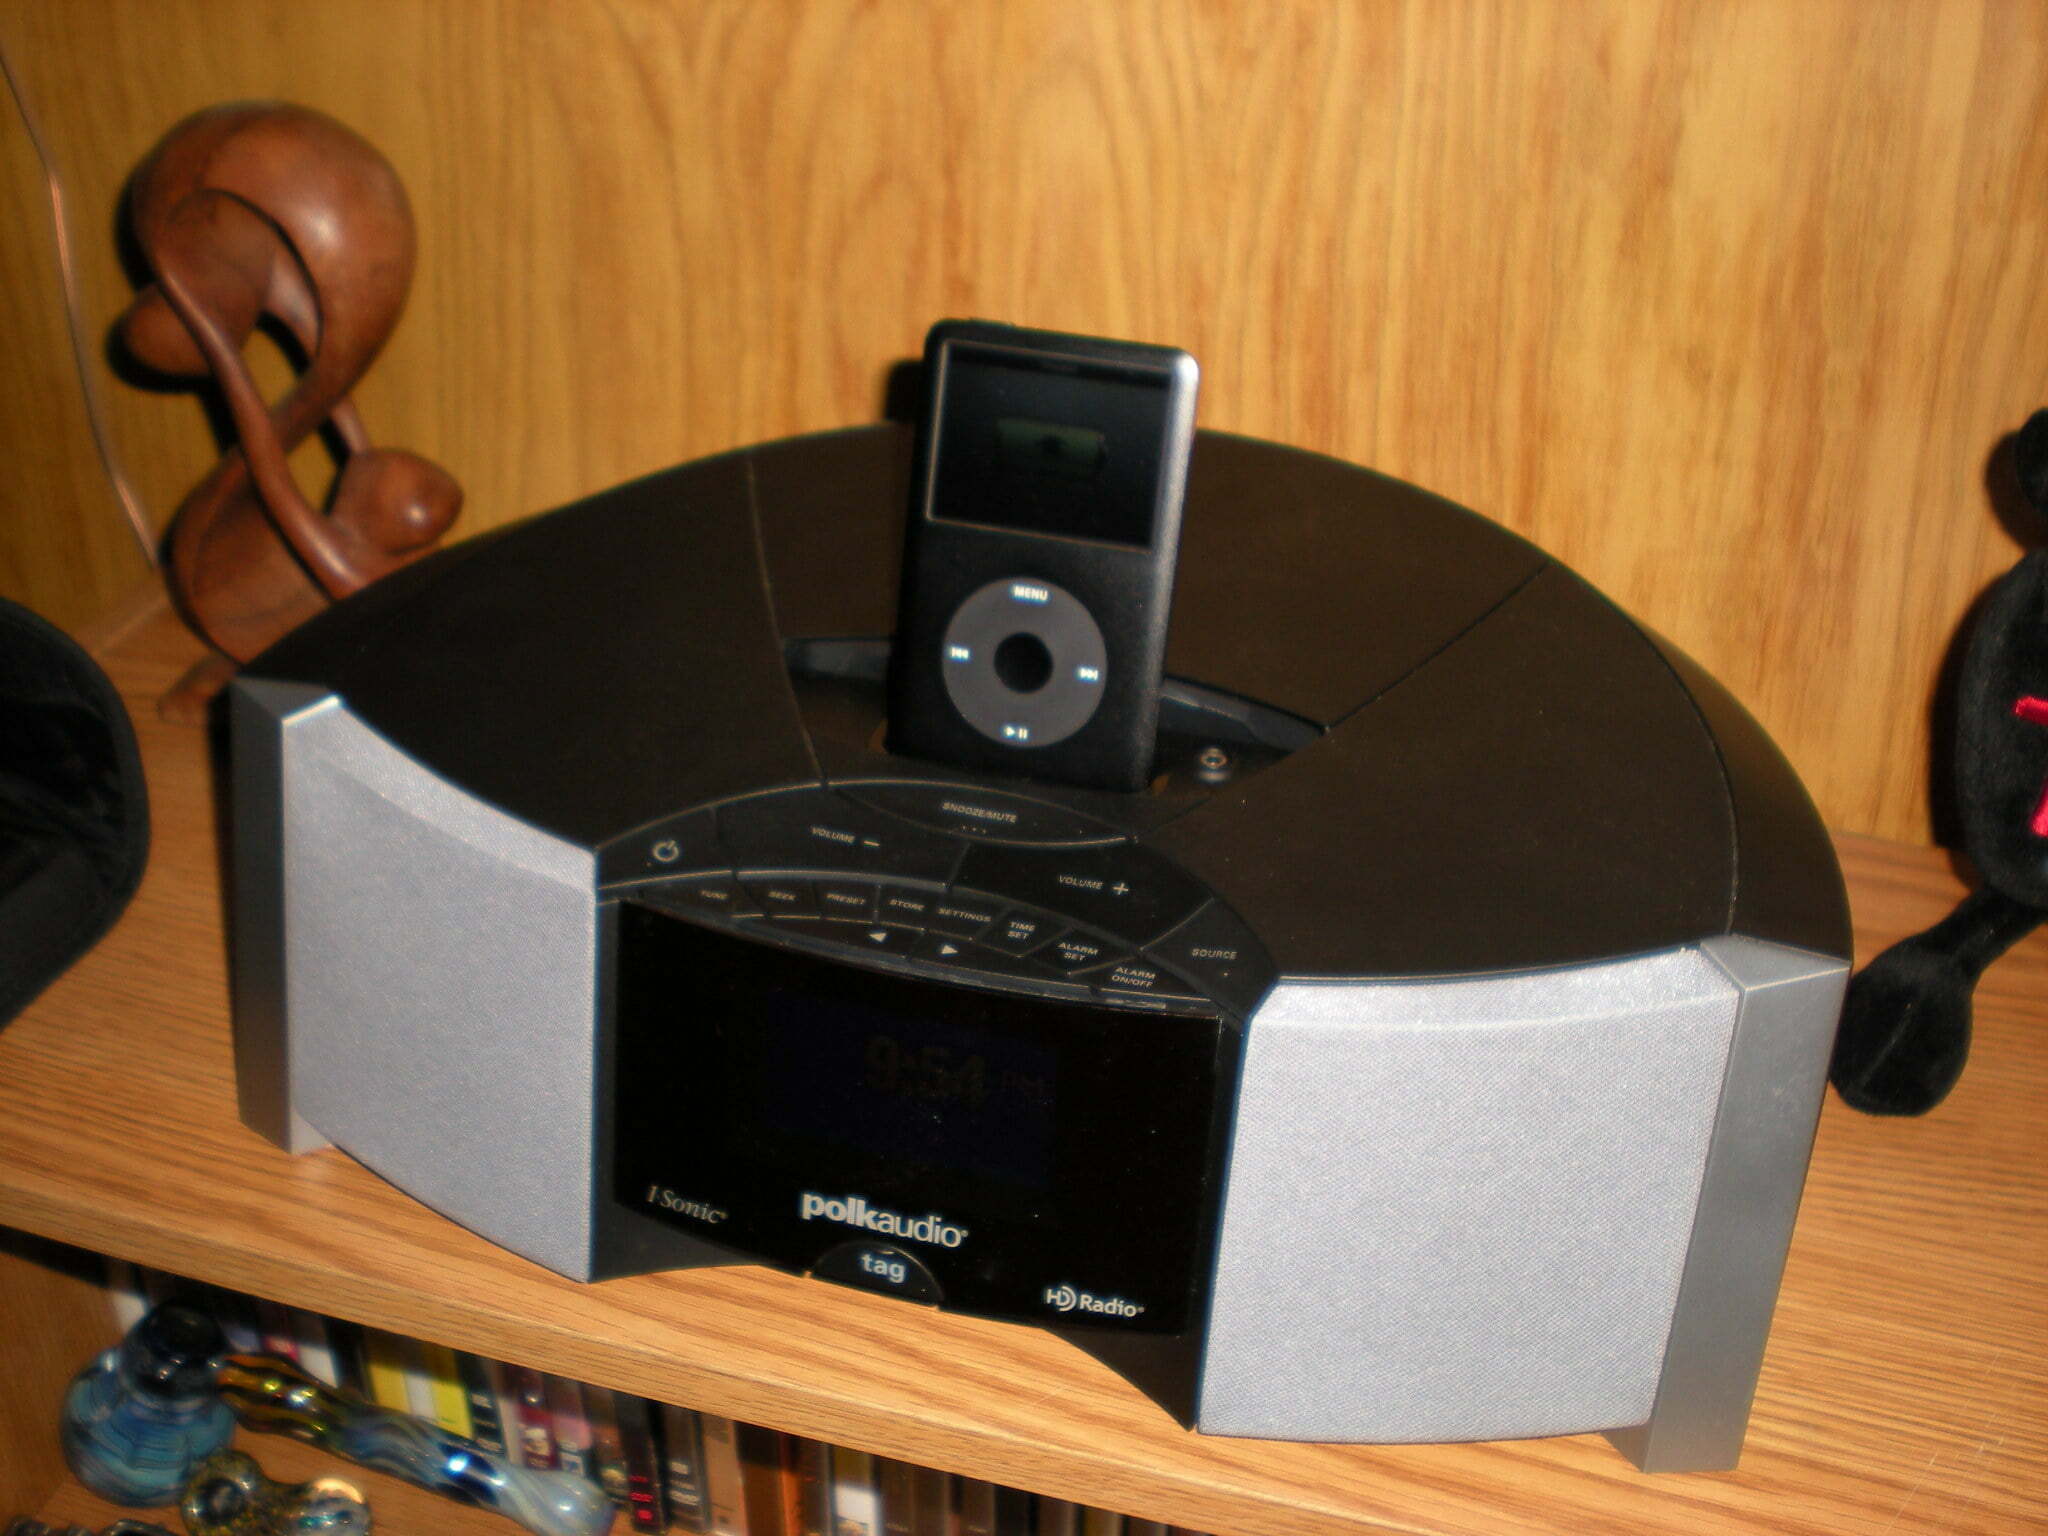 Polk Audio I-Sonic HD Radio And iPod Speaker System Review